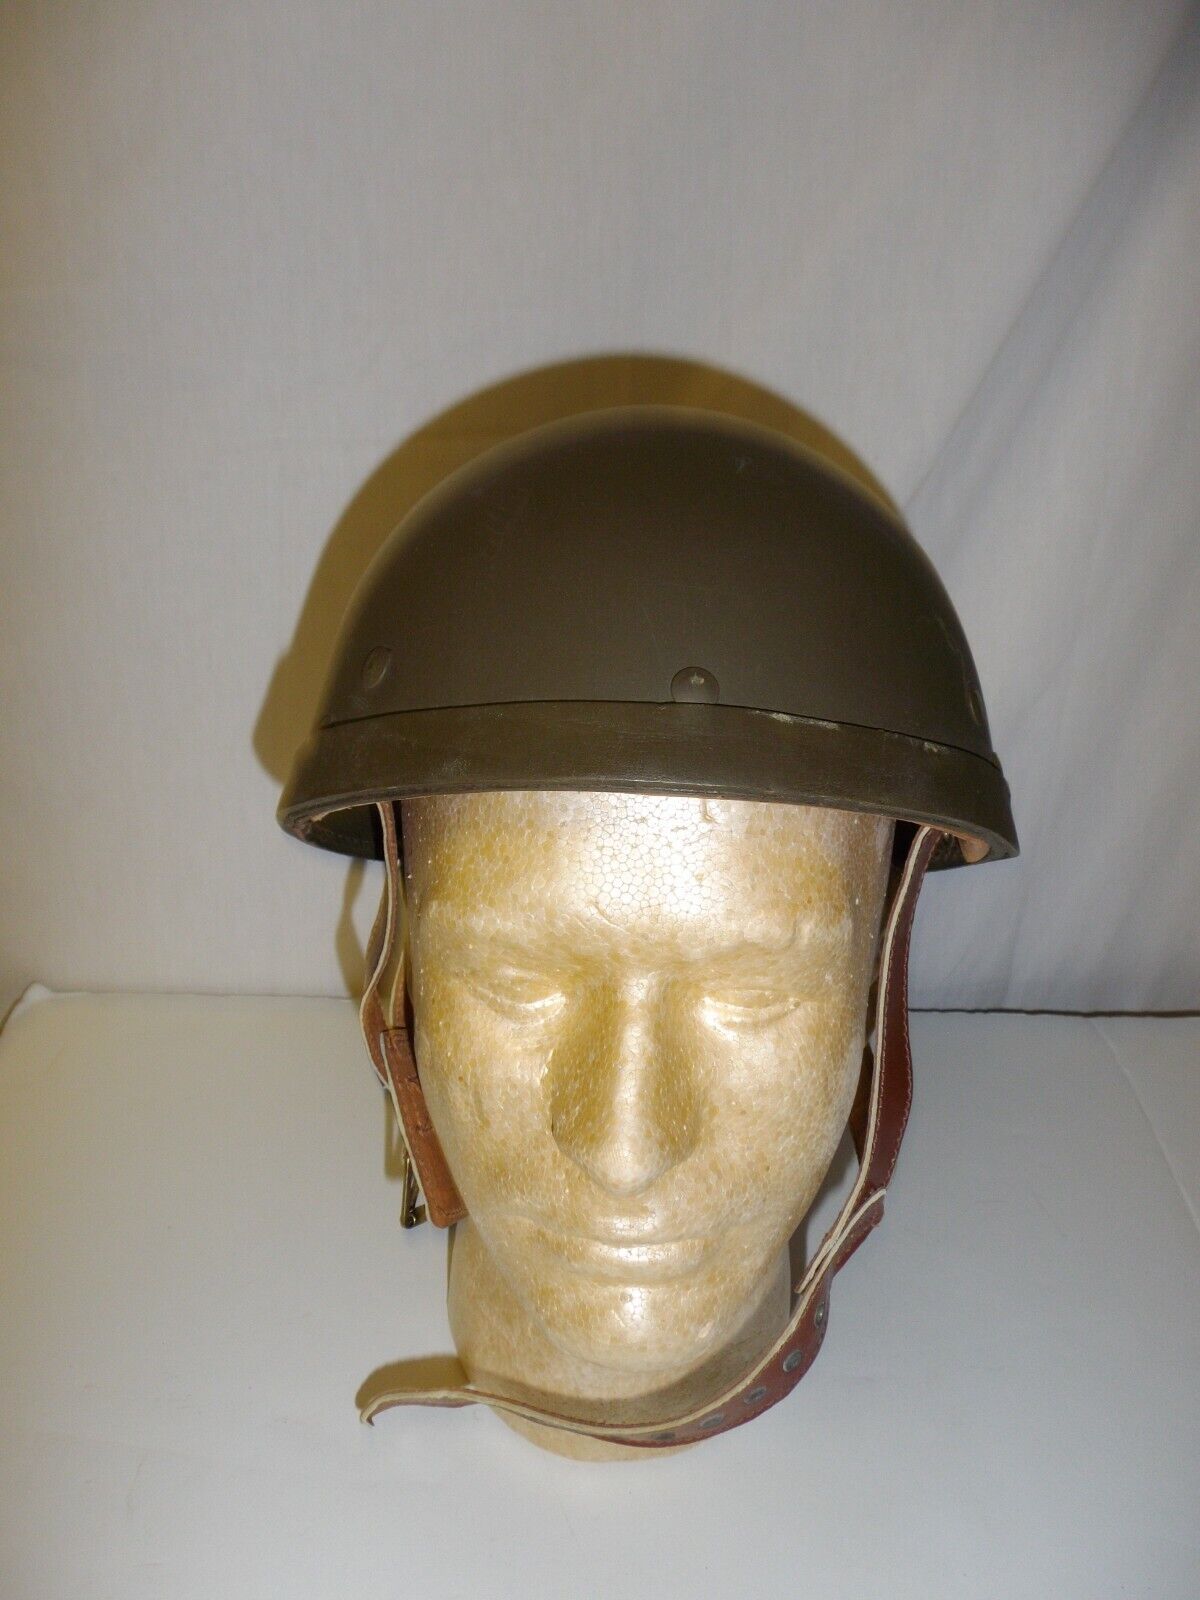 IR15A-1 French Indochina & RVN Tanker Helmet size 7